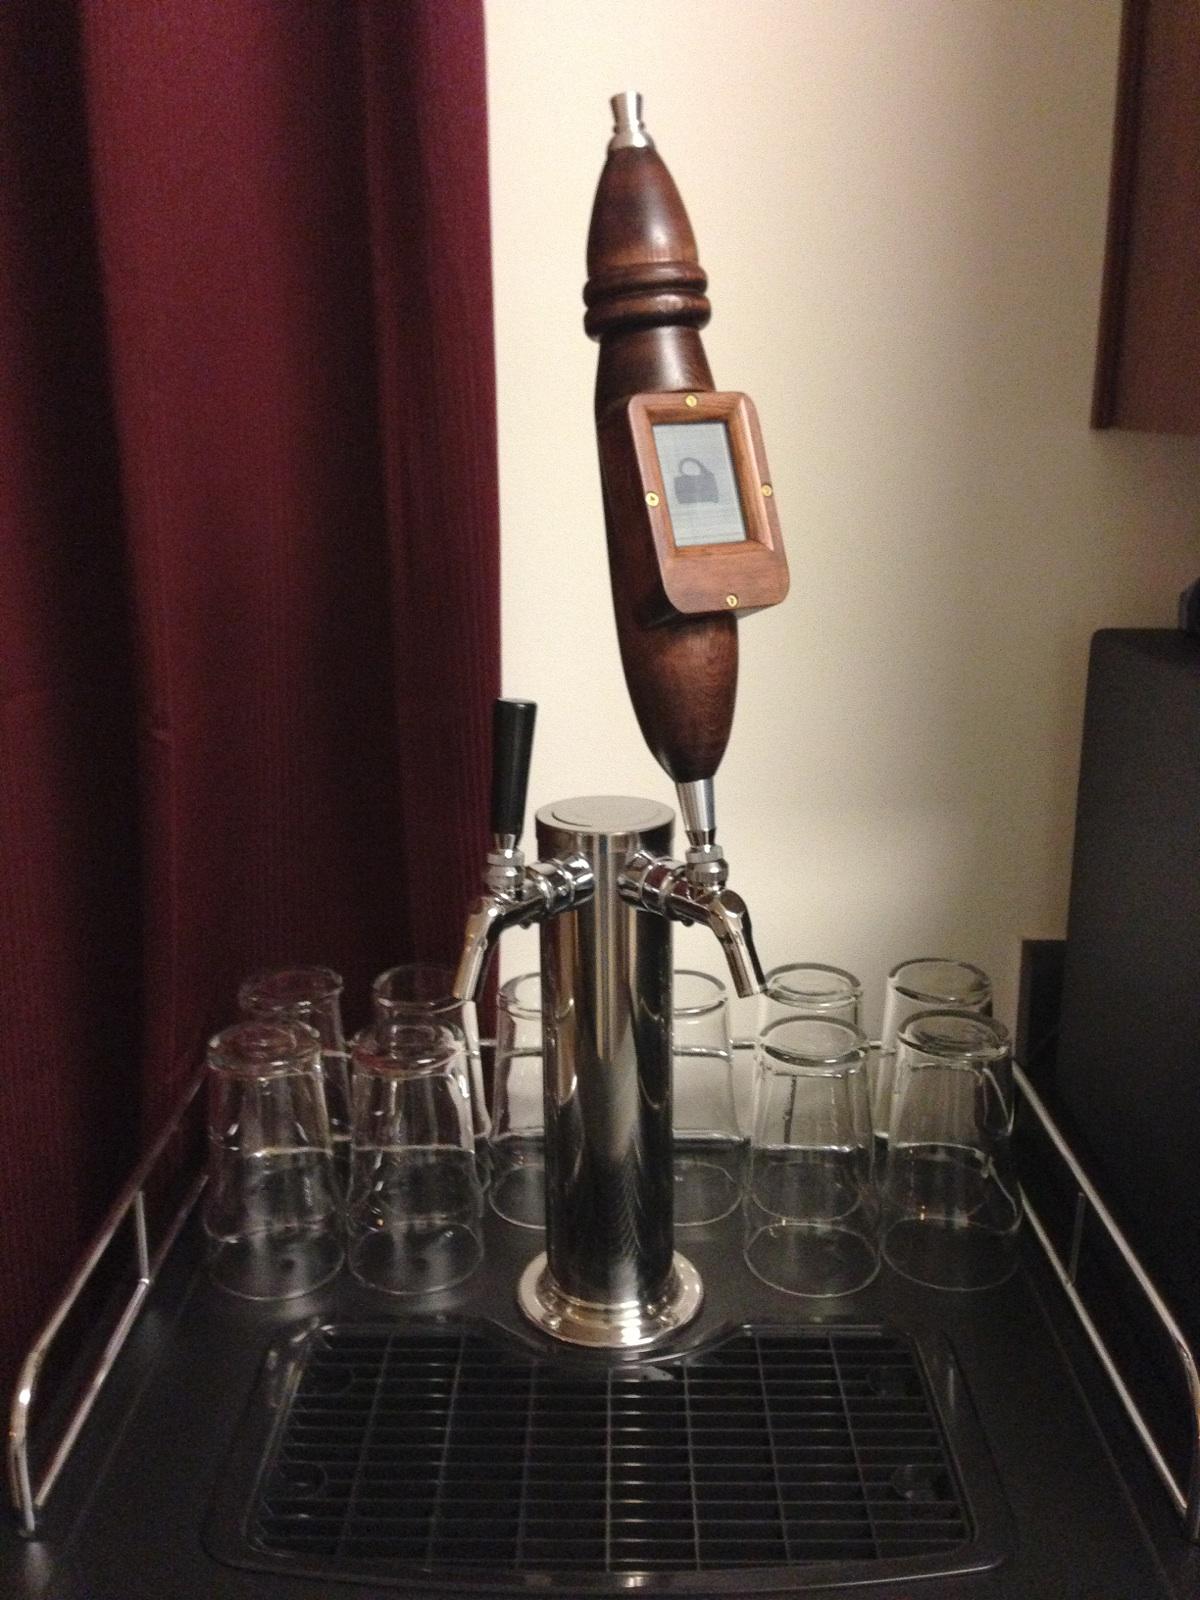 Beer Tap Handle with a digital screen for indicating the brew.